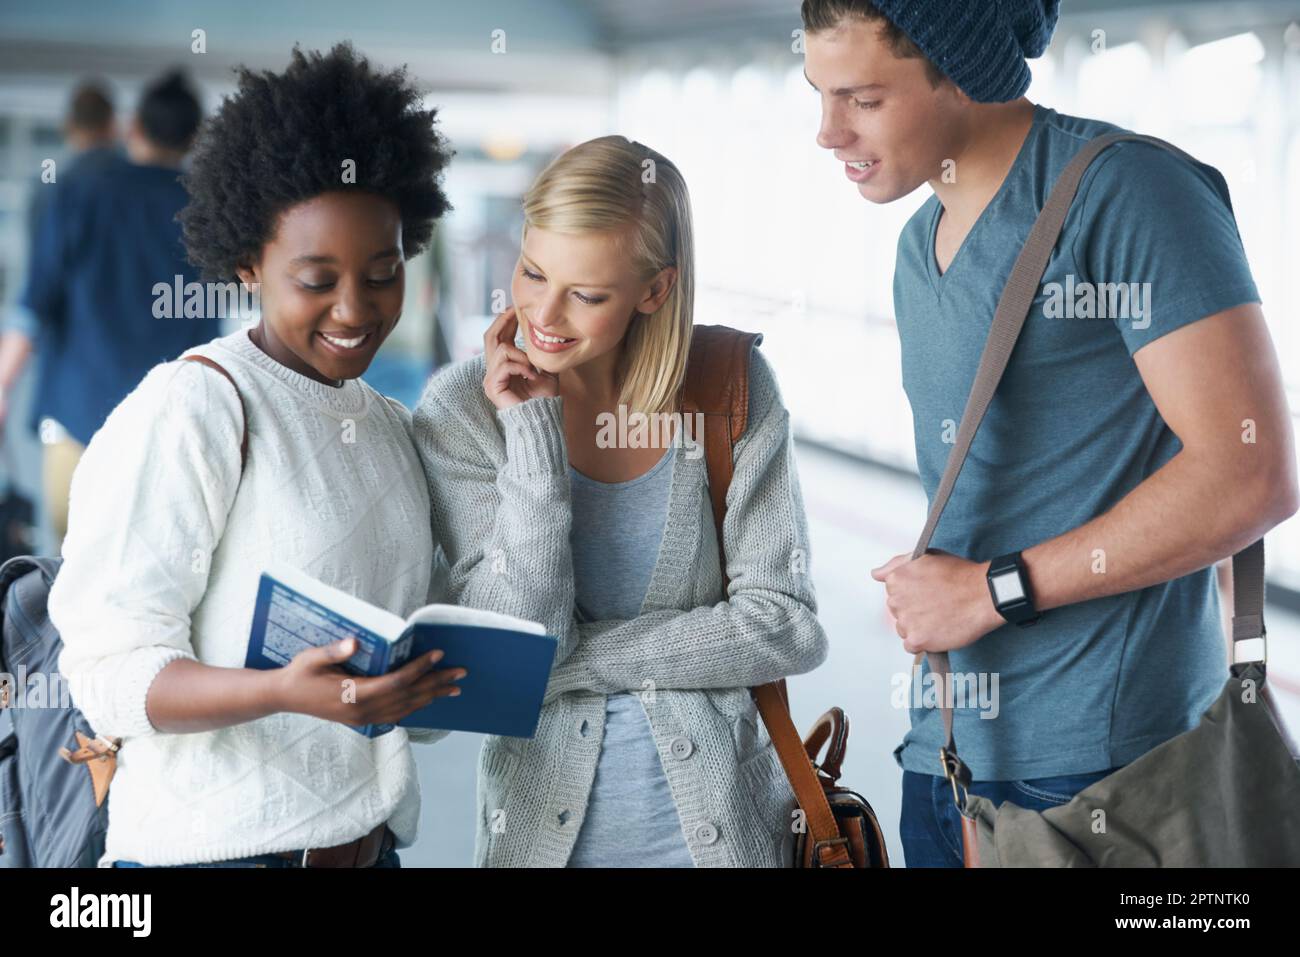 Fascinated and eager to learn. A group of college students looking at a book together Stock Photo